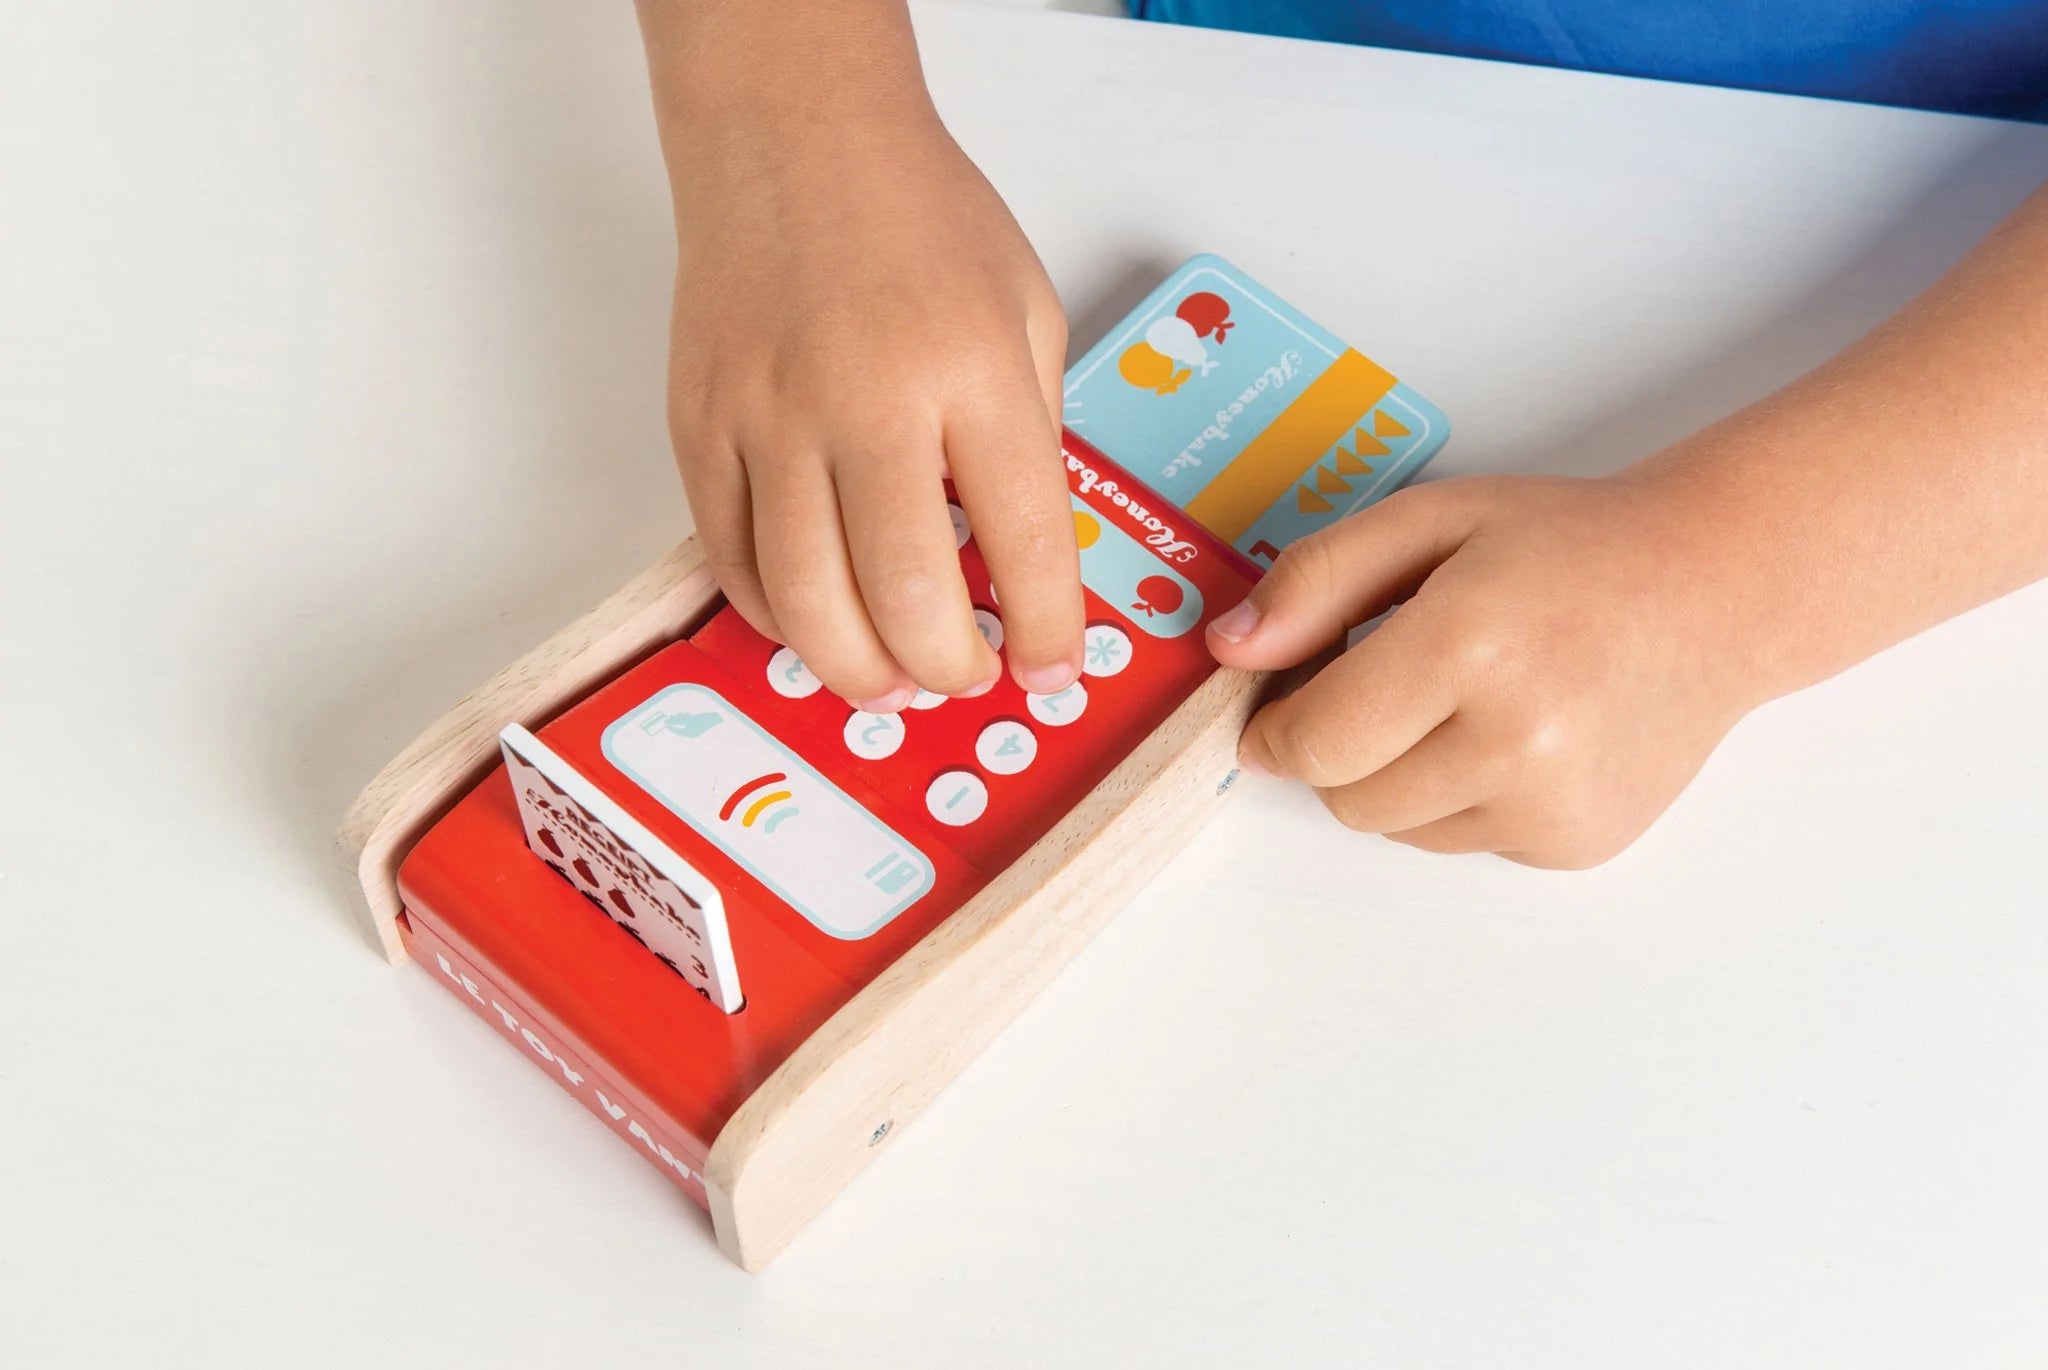 Pretend Play - ITH - Credit Card Reader